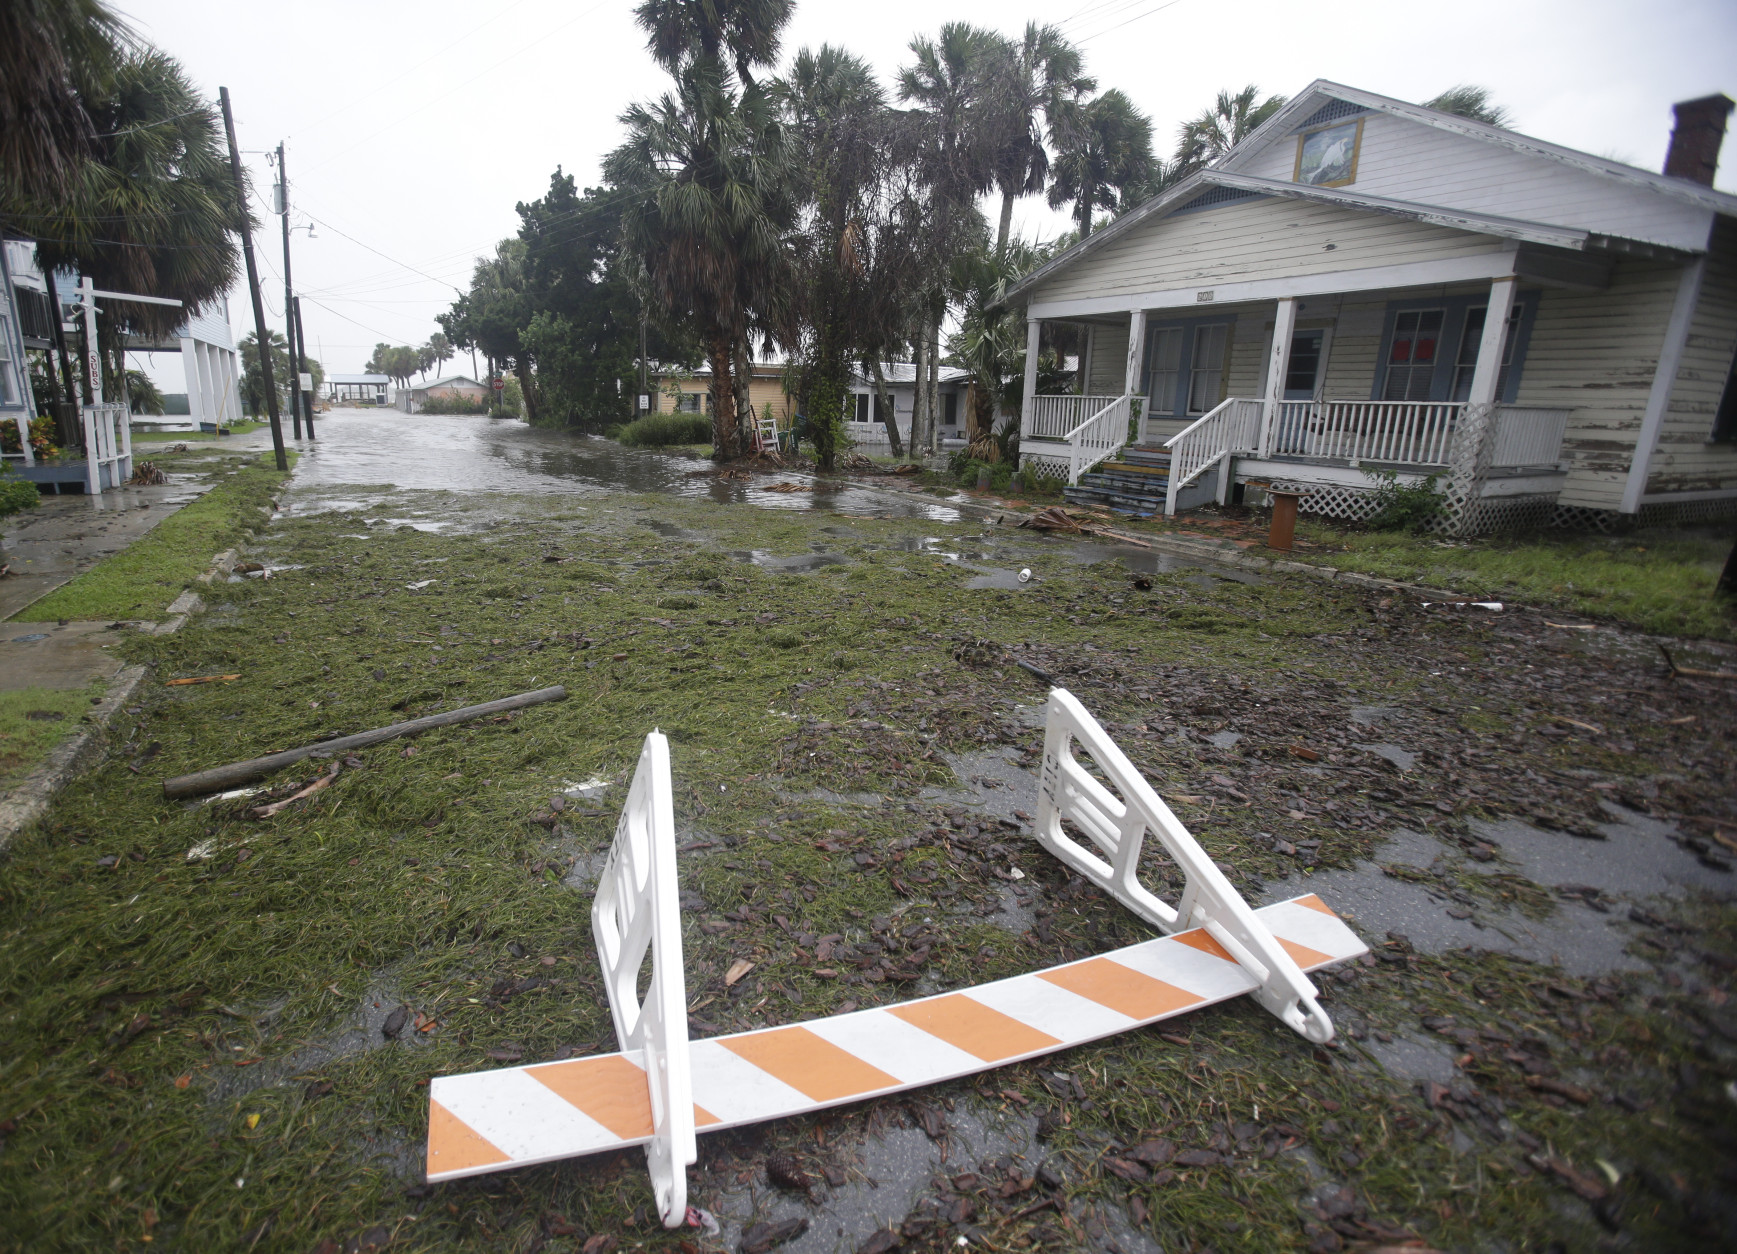 Seaweed covers a flooded street in Cedar Key, Fla. as Hurricane Hermine nears the Florida coast, Thursday, Sept. 1, 2016. Hurricane Hermine gained new strength Thursday evening and roared ever closer to Florida's Gulf Coast, where rough surf began smashing against docks and boathouses and people braced for the first direct hit on the state from a hurricane in over a decade. (AP Photo/John Raoux)